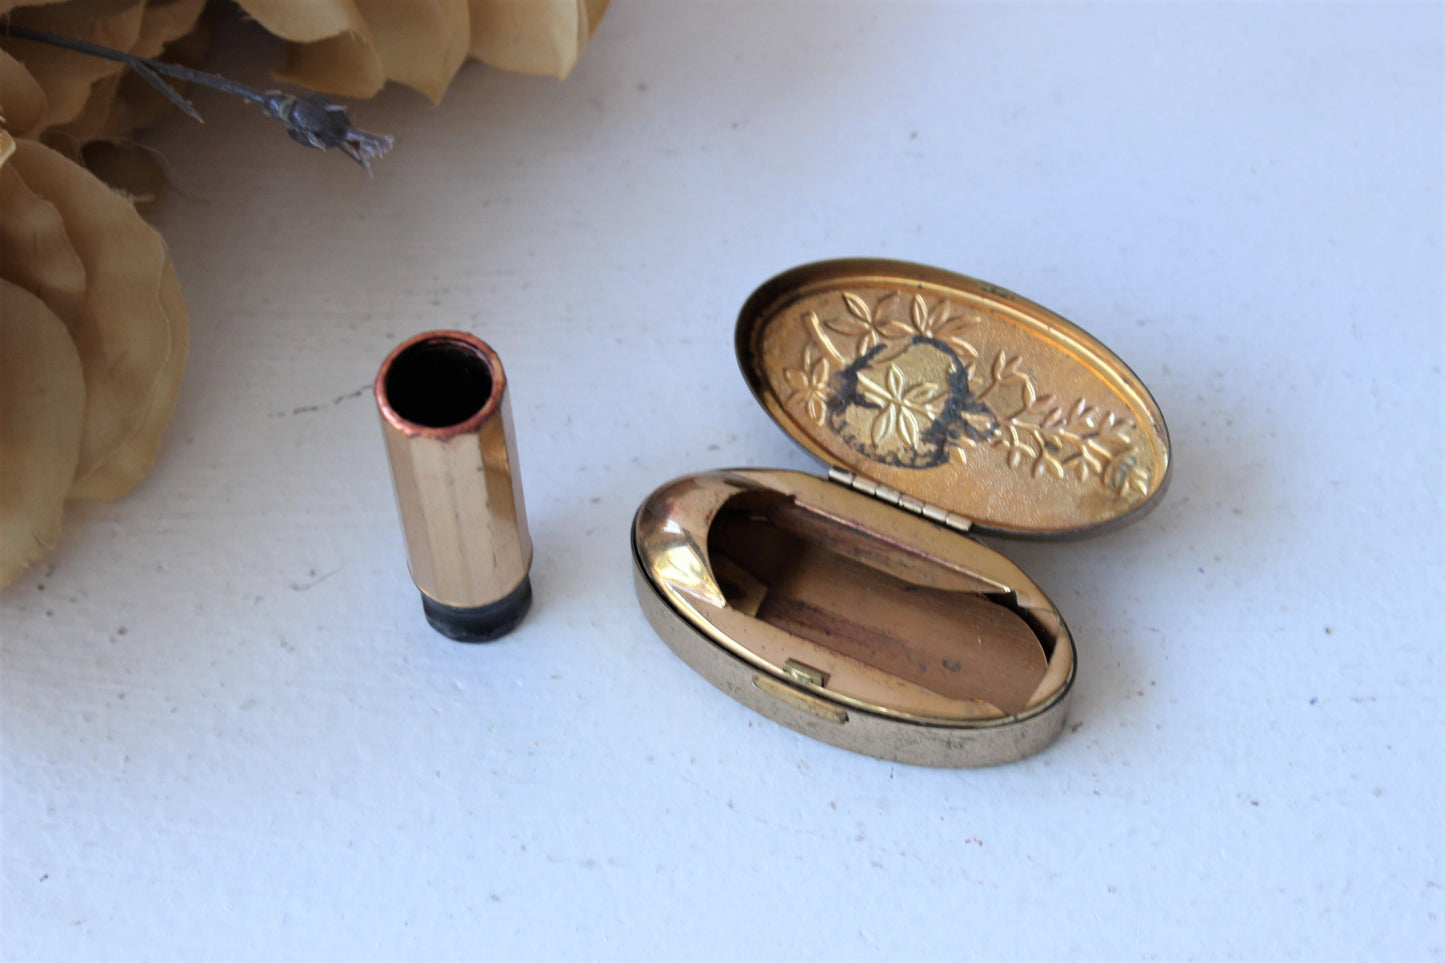 Vintage 1950s Max Factor Lipstick Holder Compact